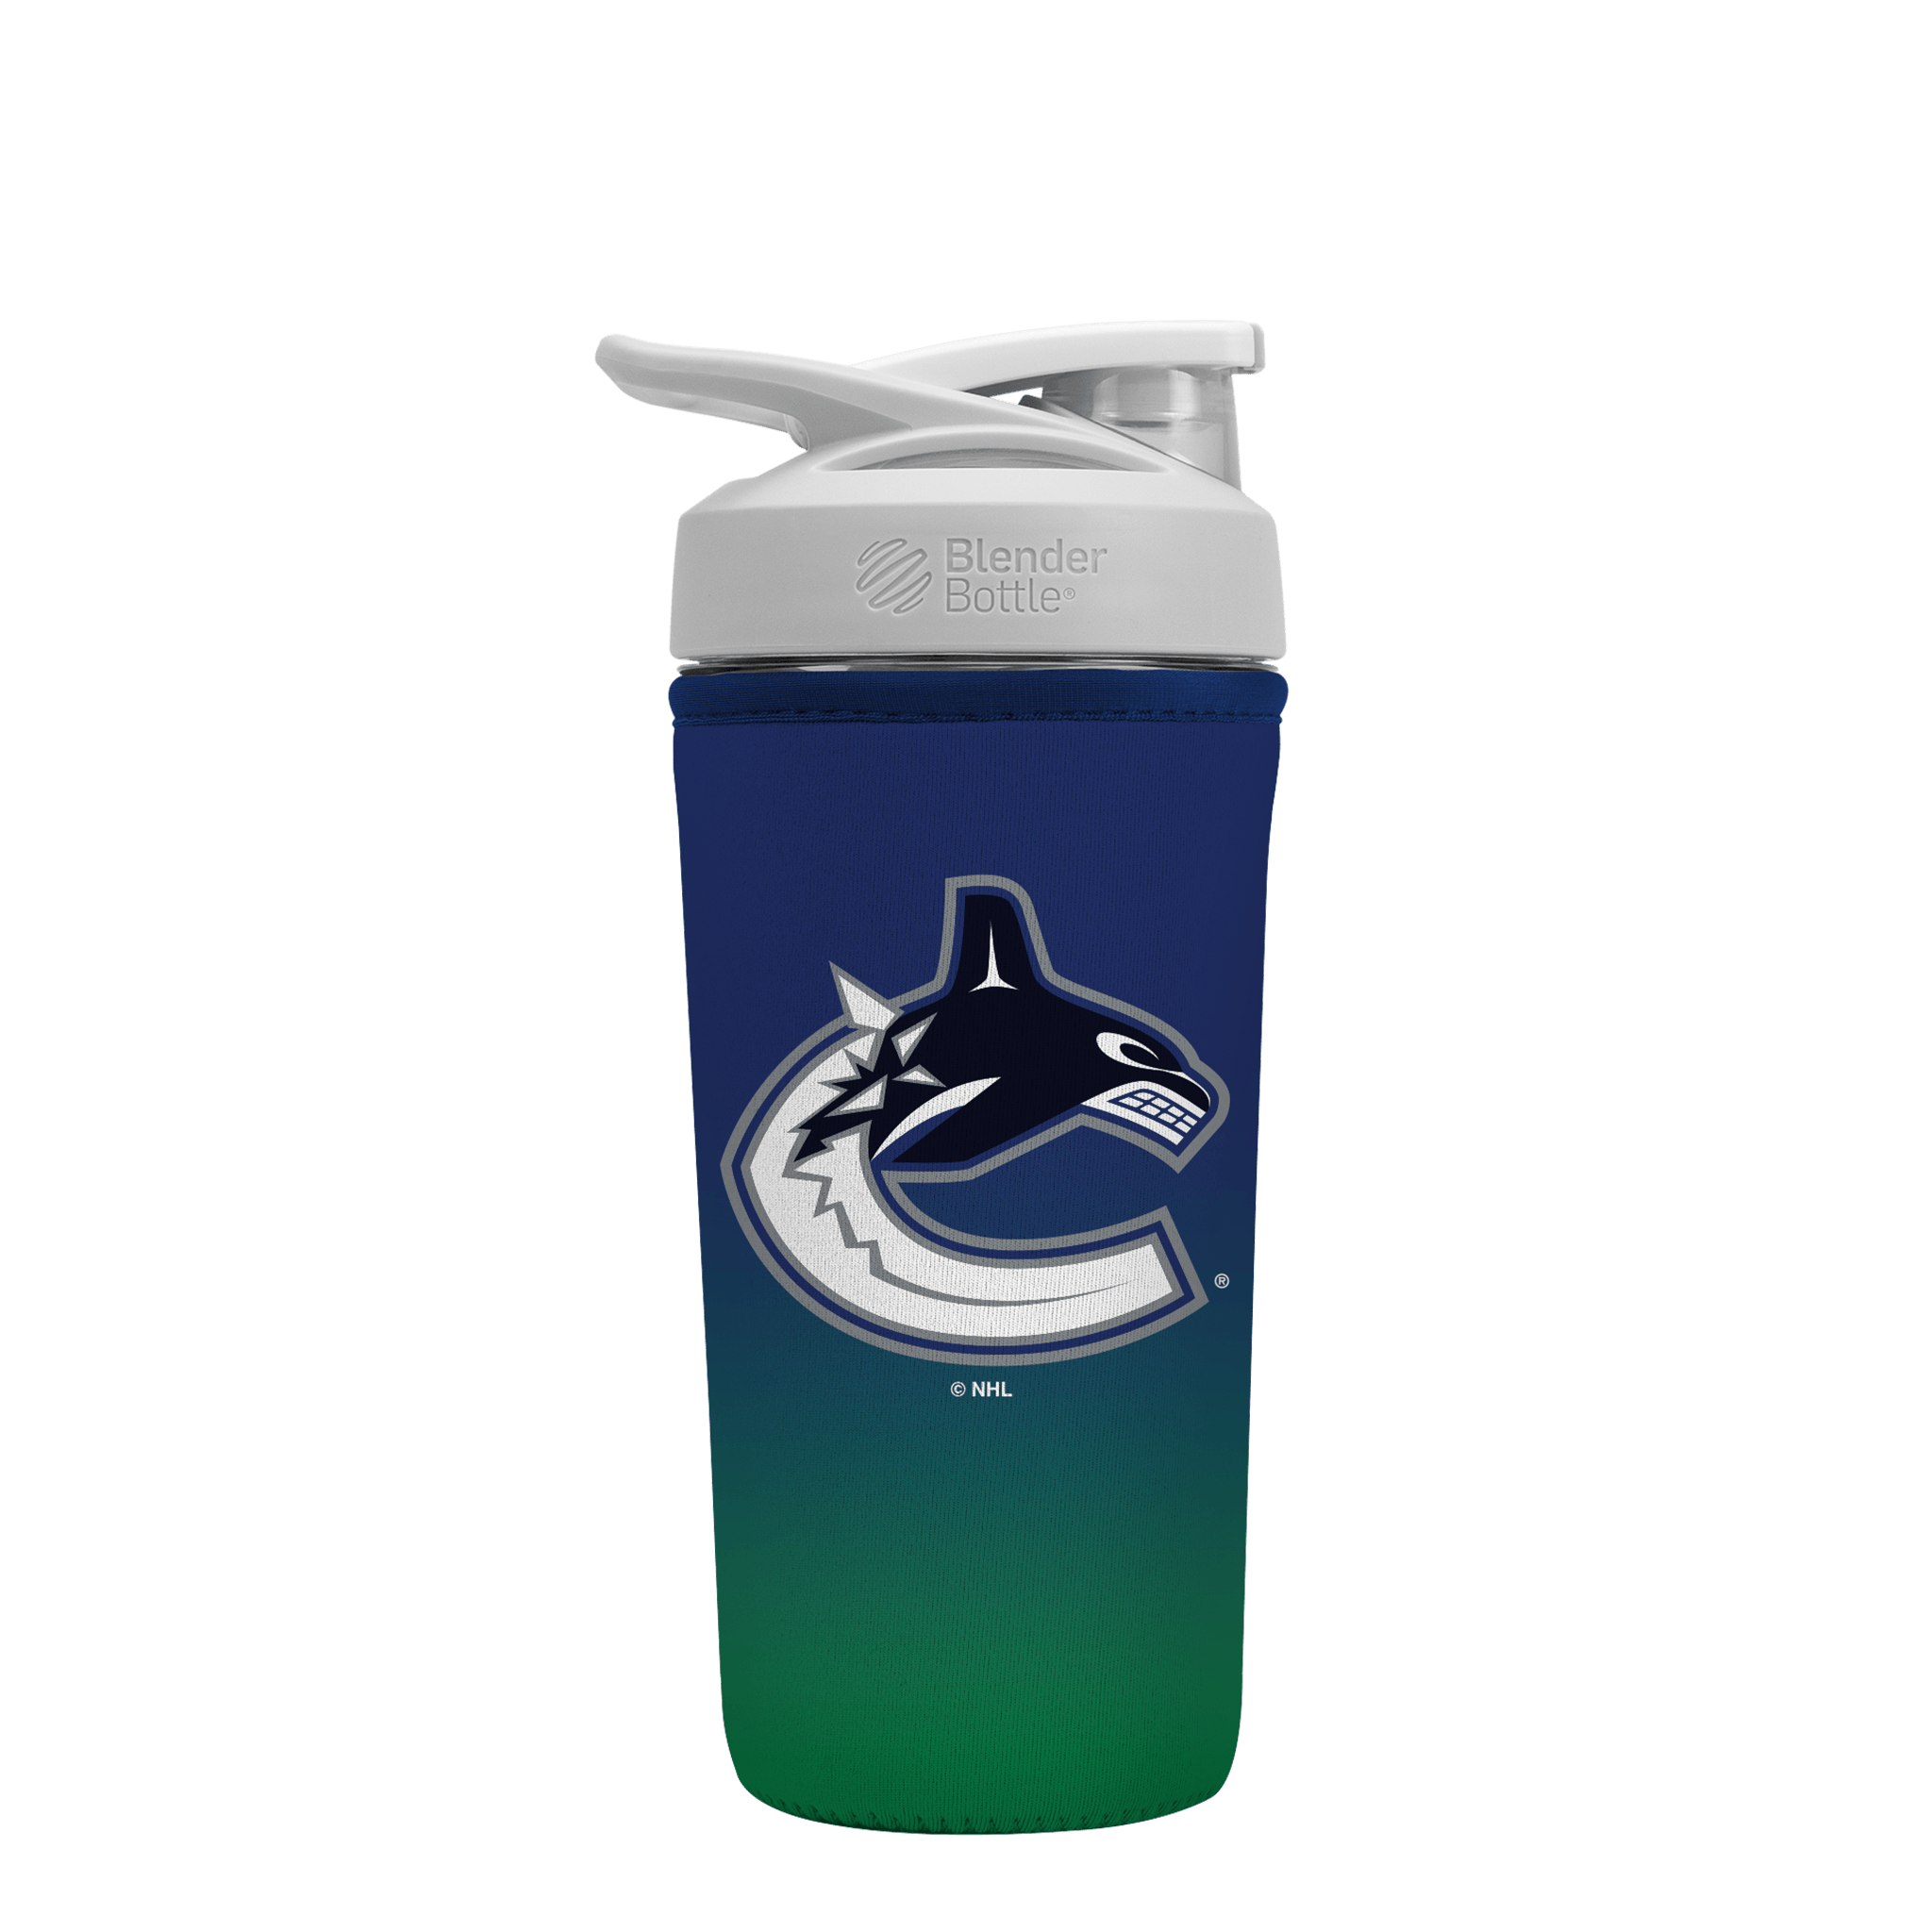 Miami Dolphins Lunch Box Show off your team pride with the…